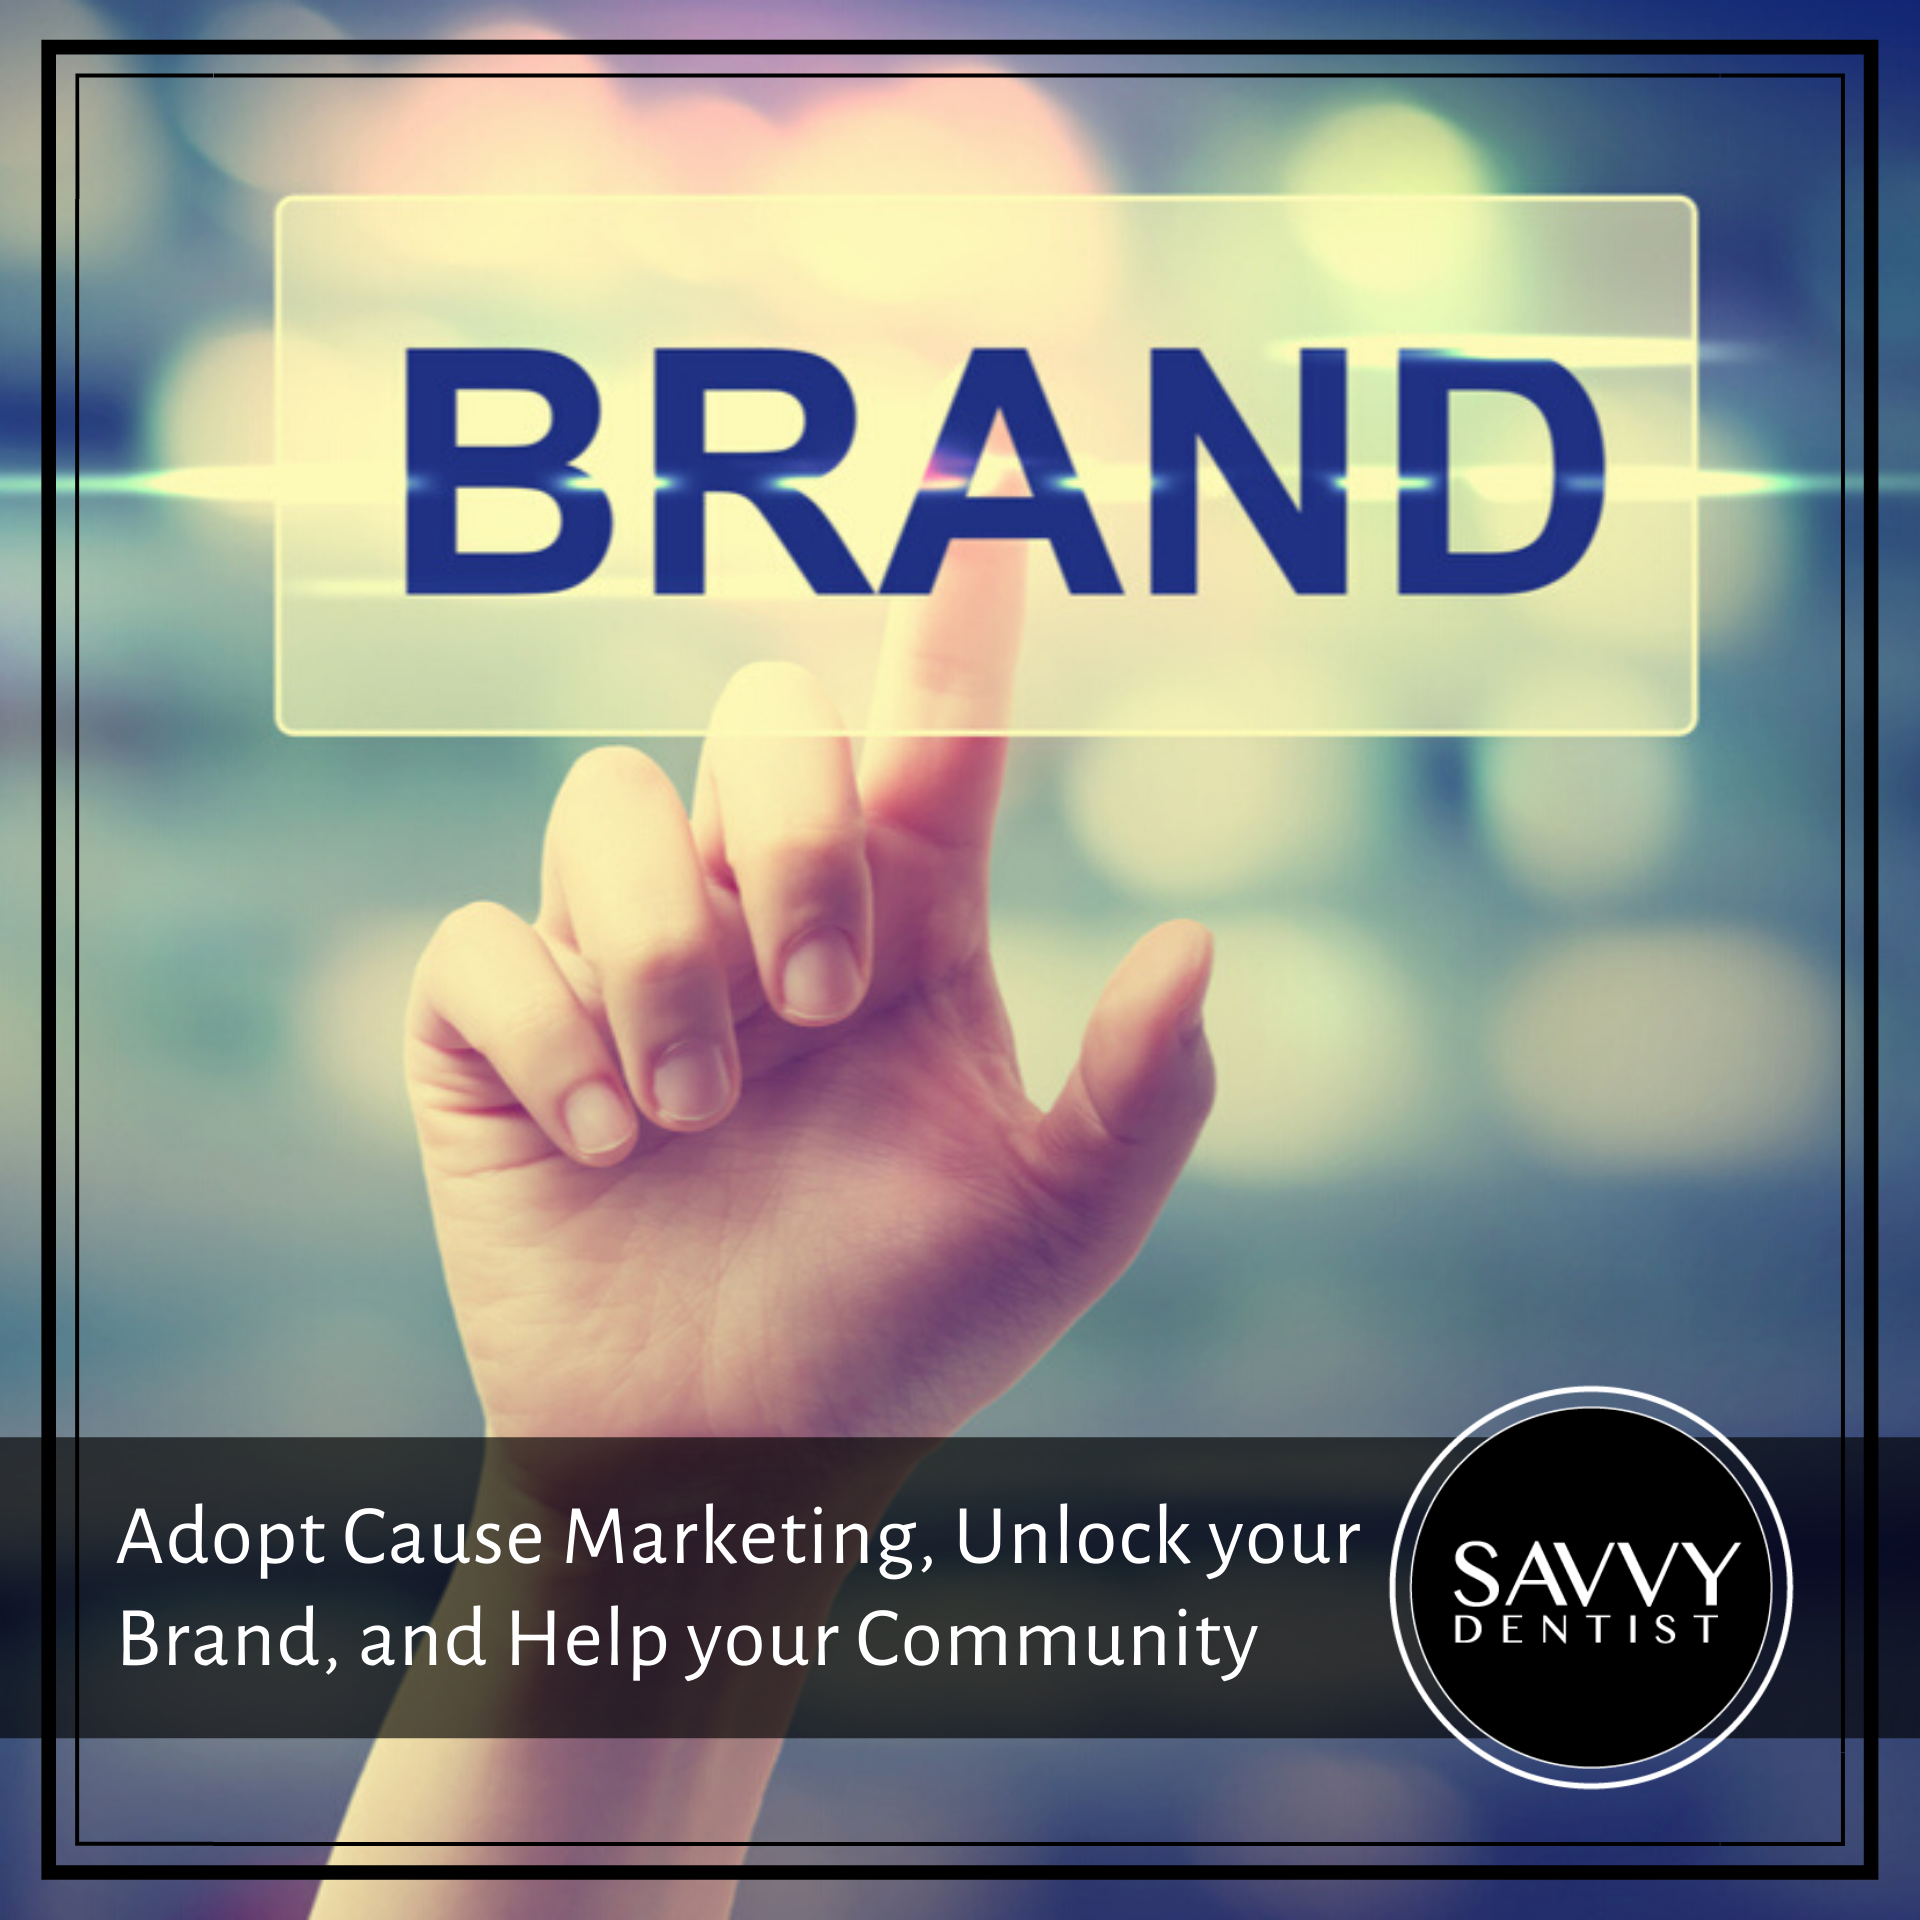 Adopt Cause Marketing, Unlock Your Brand, and Help Your Community